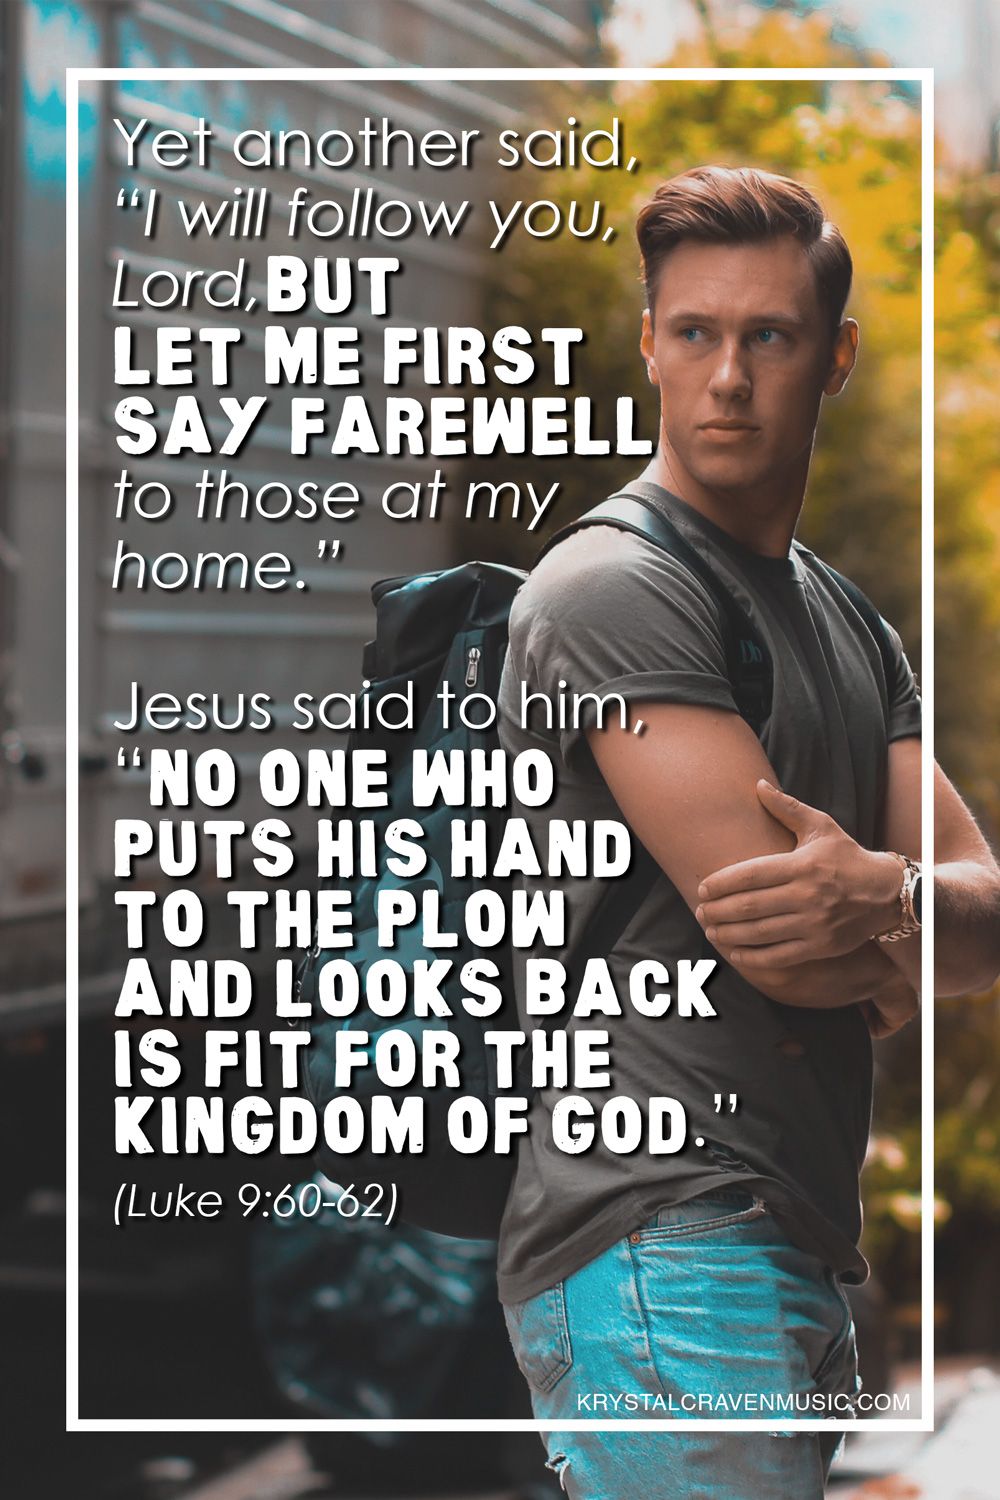 The Bible verse text from Luke 9:61-62: "Yet another said, “I will follow you, Lord, but let me first say farewell to those at my home.” Jesus said to him, “No one who puts his hand to the plow and looks back is fit for the kingdom of God.”" This scripture is a young man looking back over his shoulder while wearing a backpack.